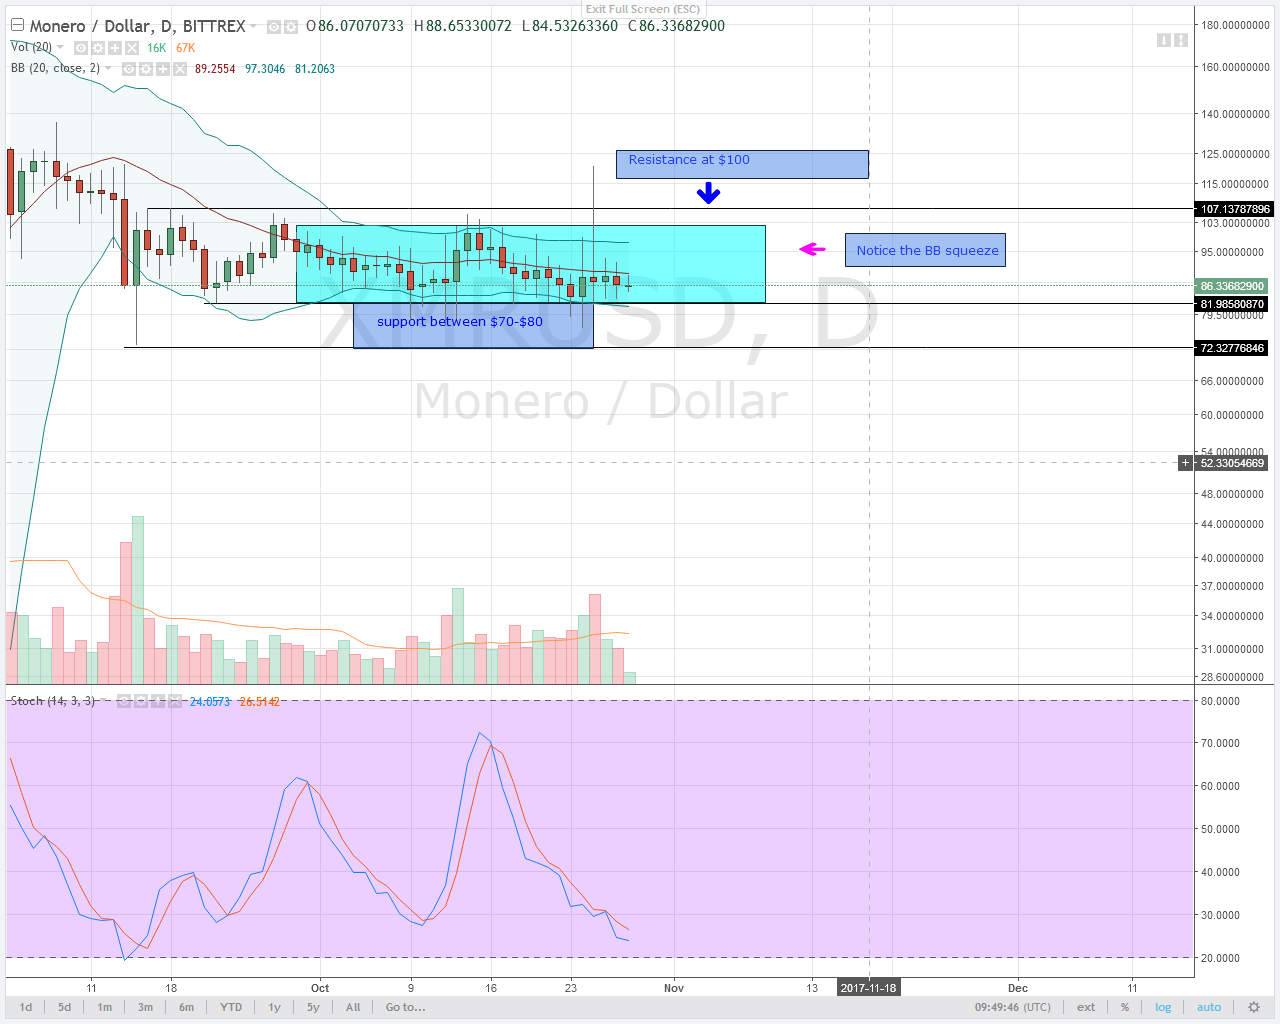 ALT COIN TECHNICAL ANALYSIS: PRICE ACTION STILL IN CONSOLIDATION